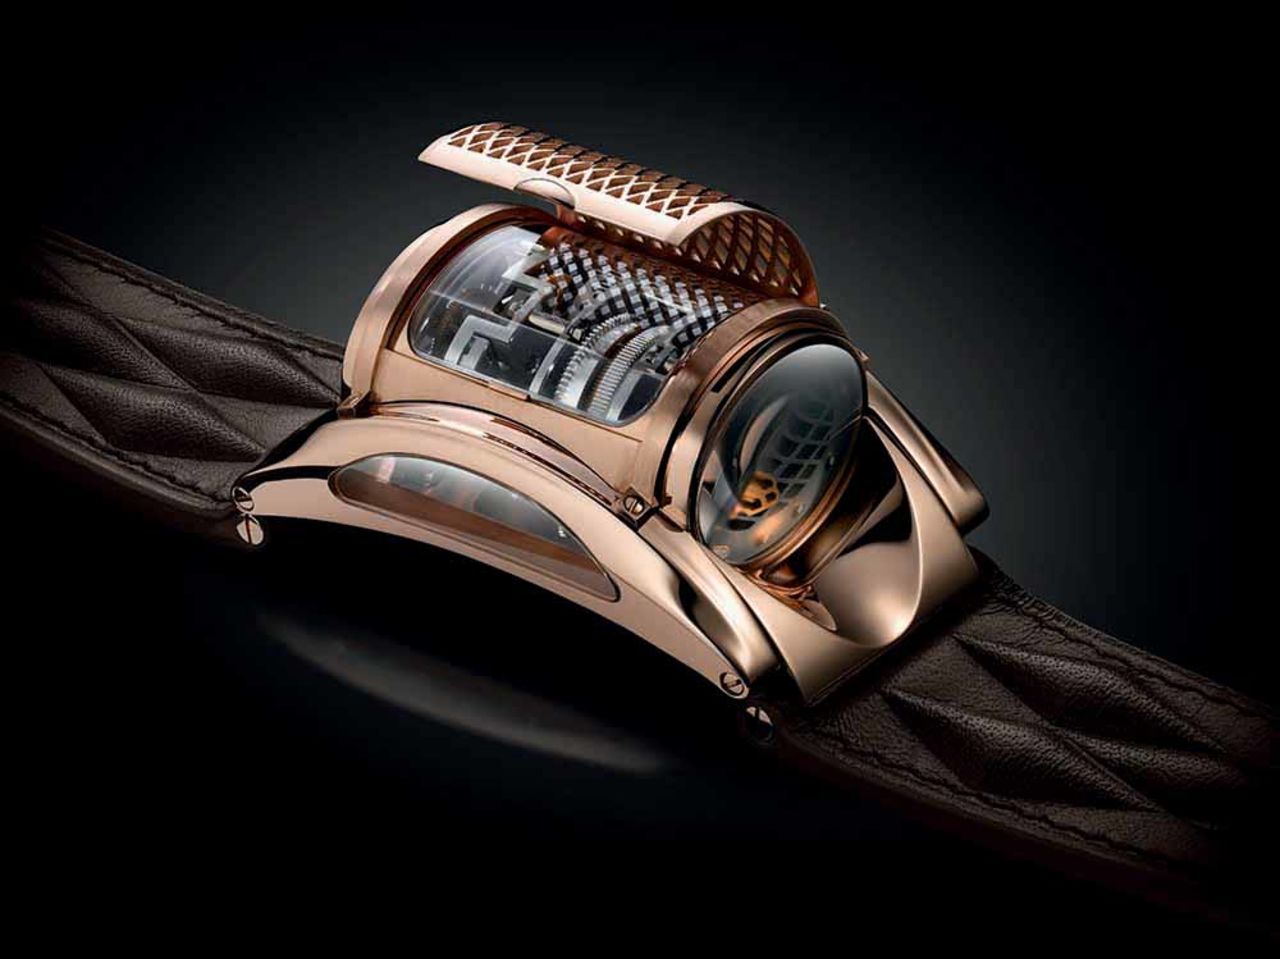 <a href="http://www.parmigiani.ch/" target="_blank" target="_blank">Parmigiani</a> unveiled three watches meant to commemorate 10 years of collaborations with Bugatti. The Bugatti Type 370 Révélation even has a grille inspired by the Bugatti Veyron. 